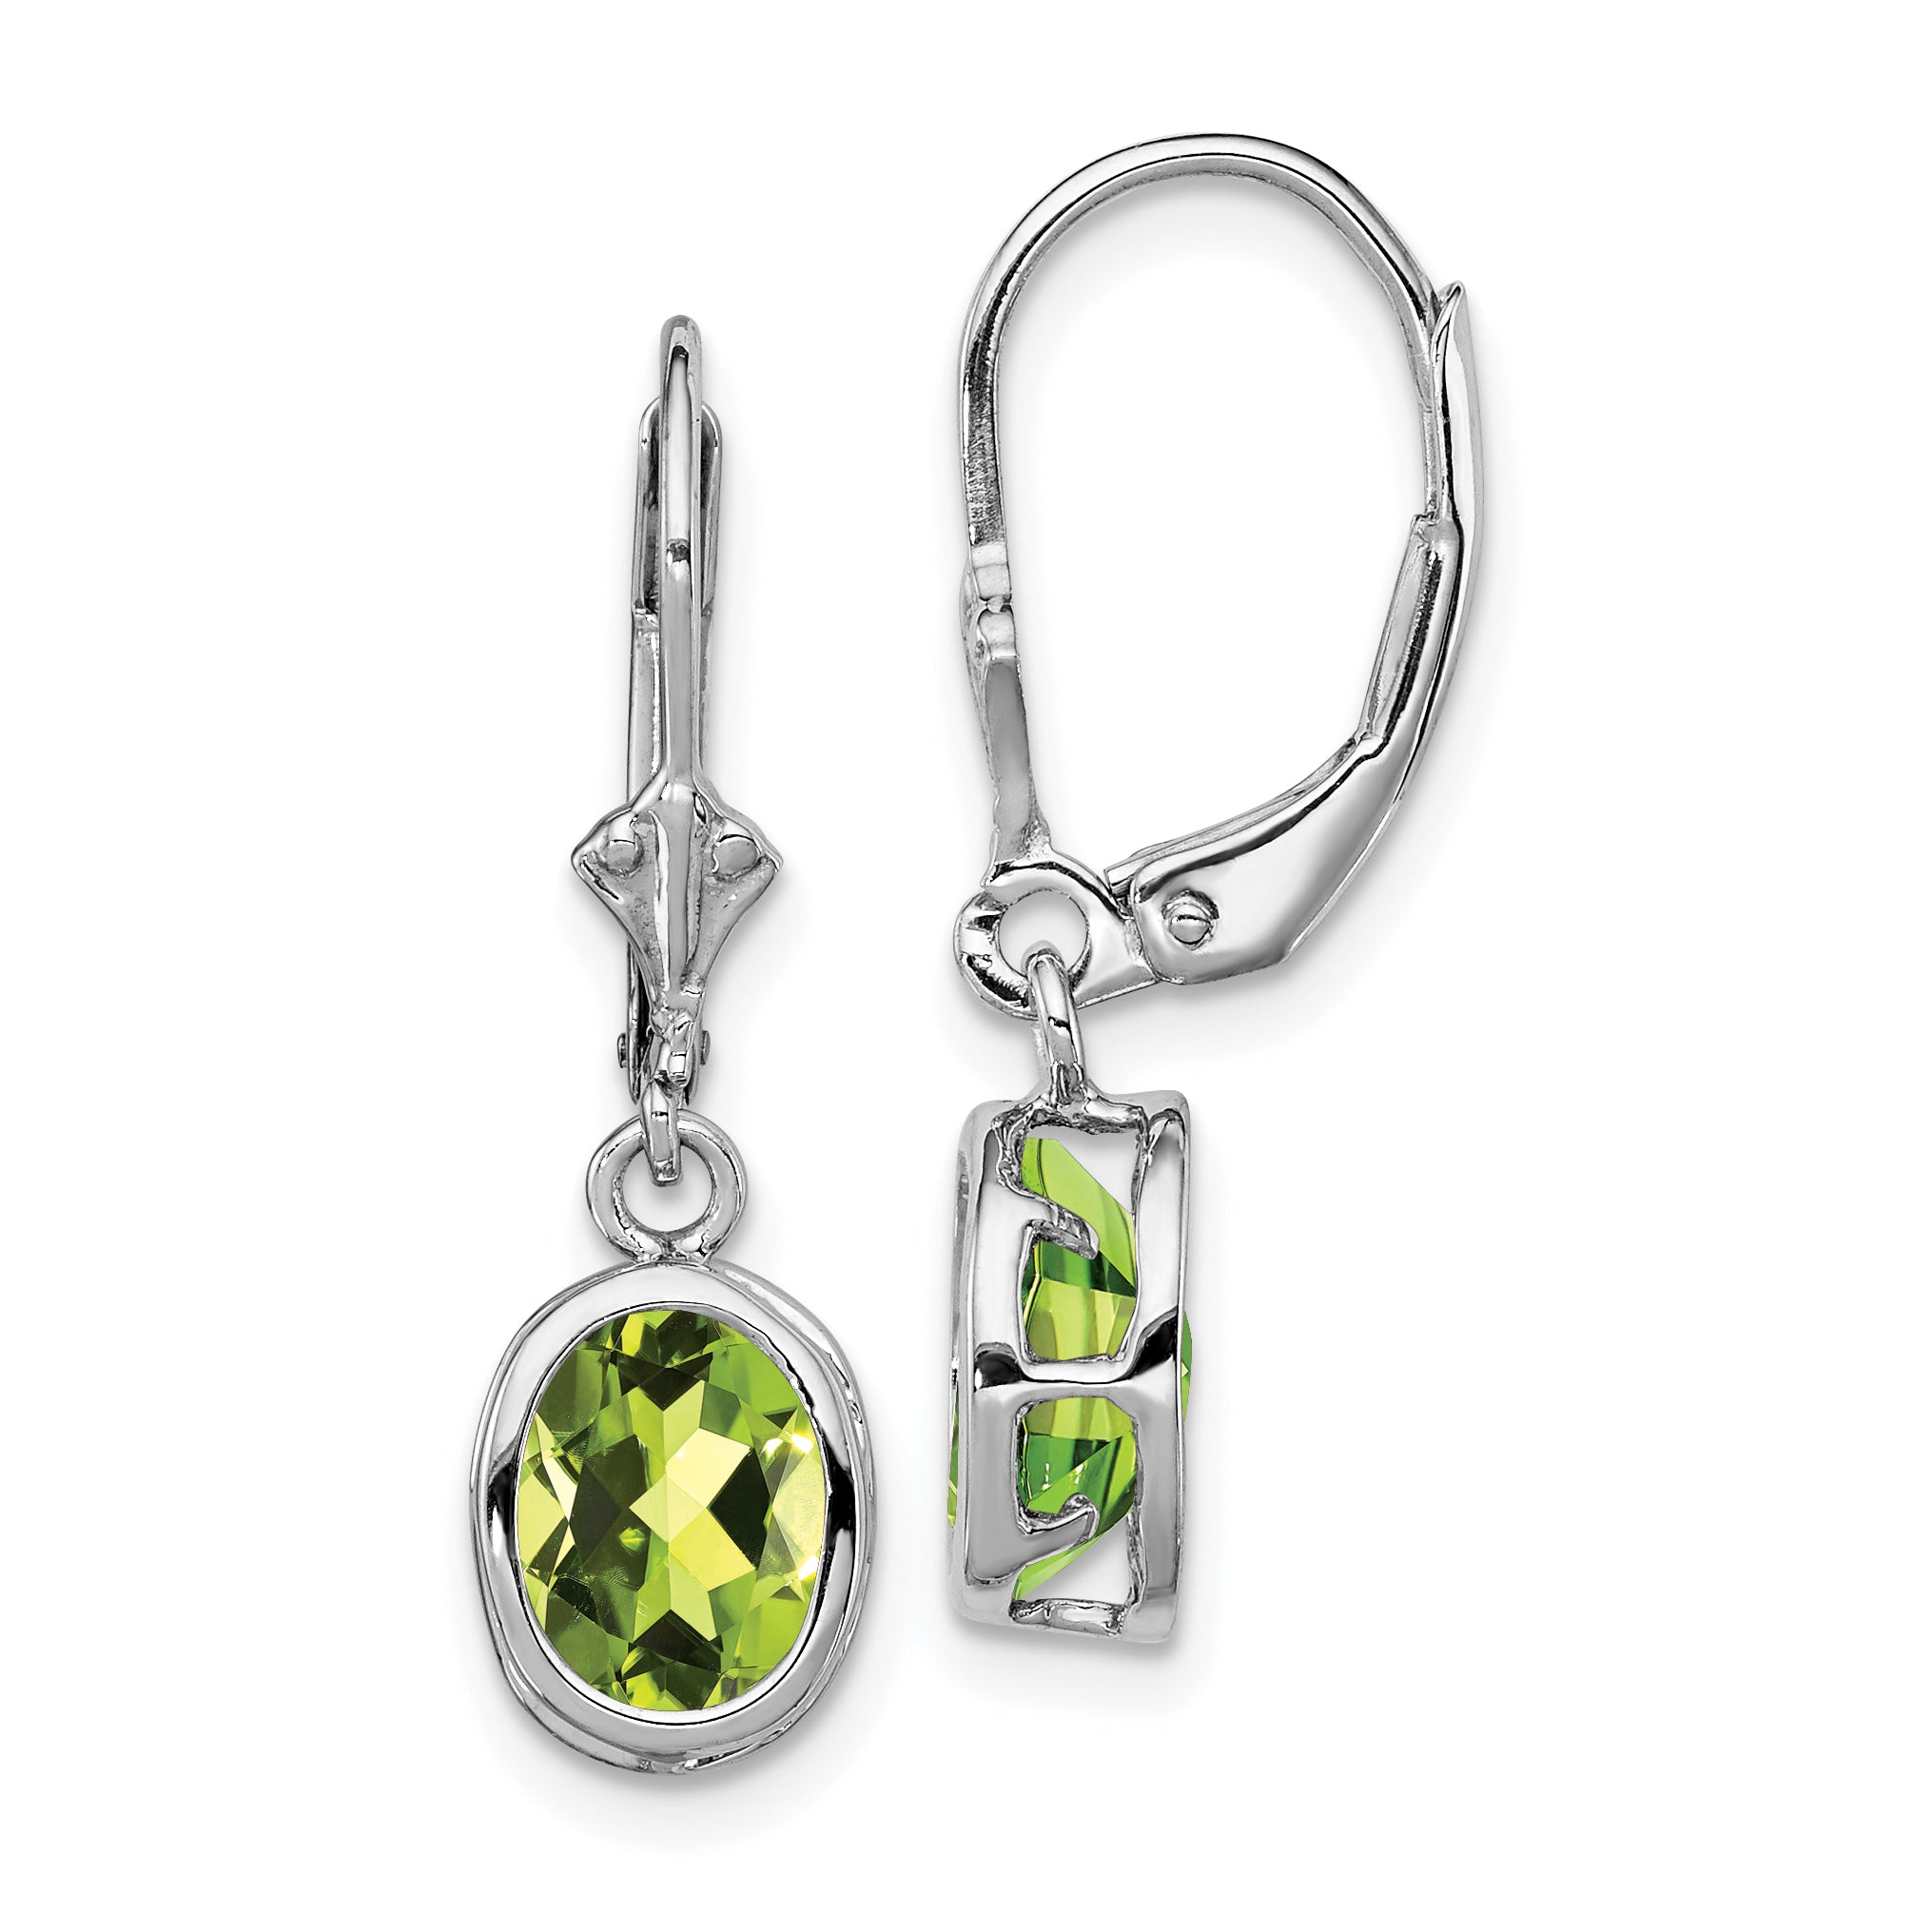 Sterling Silver Rhodium Plated 8x6mm Oval Peridot Leverback Earrings